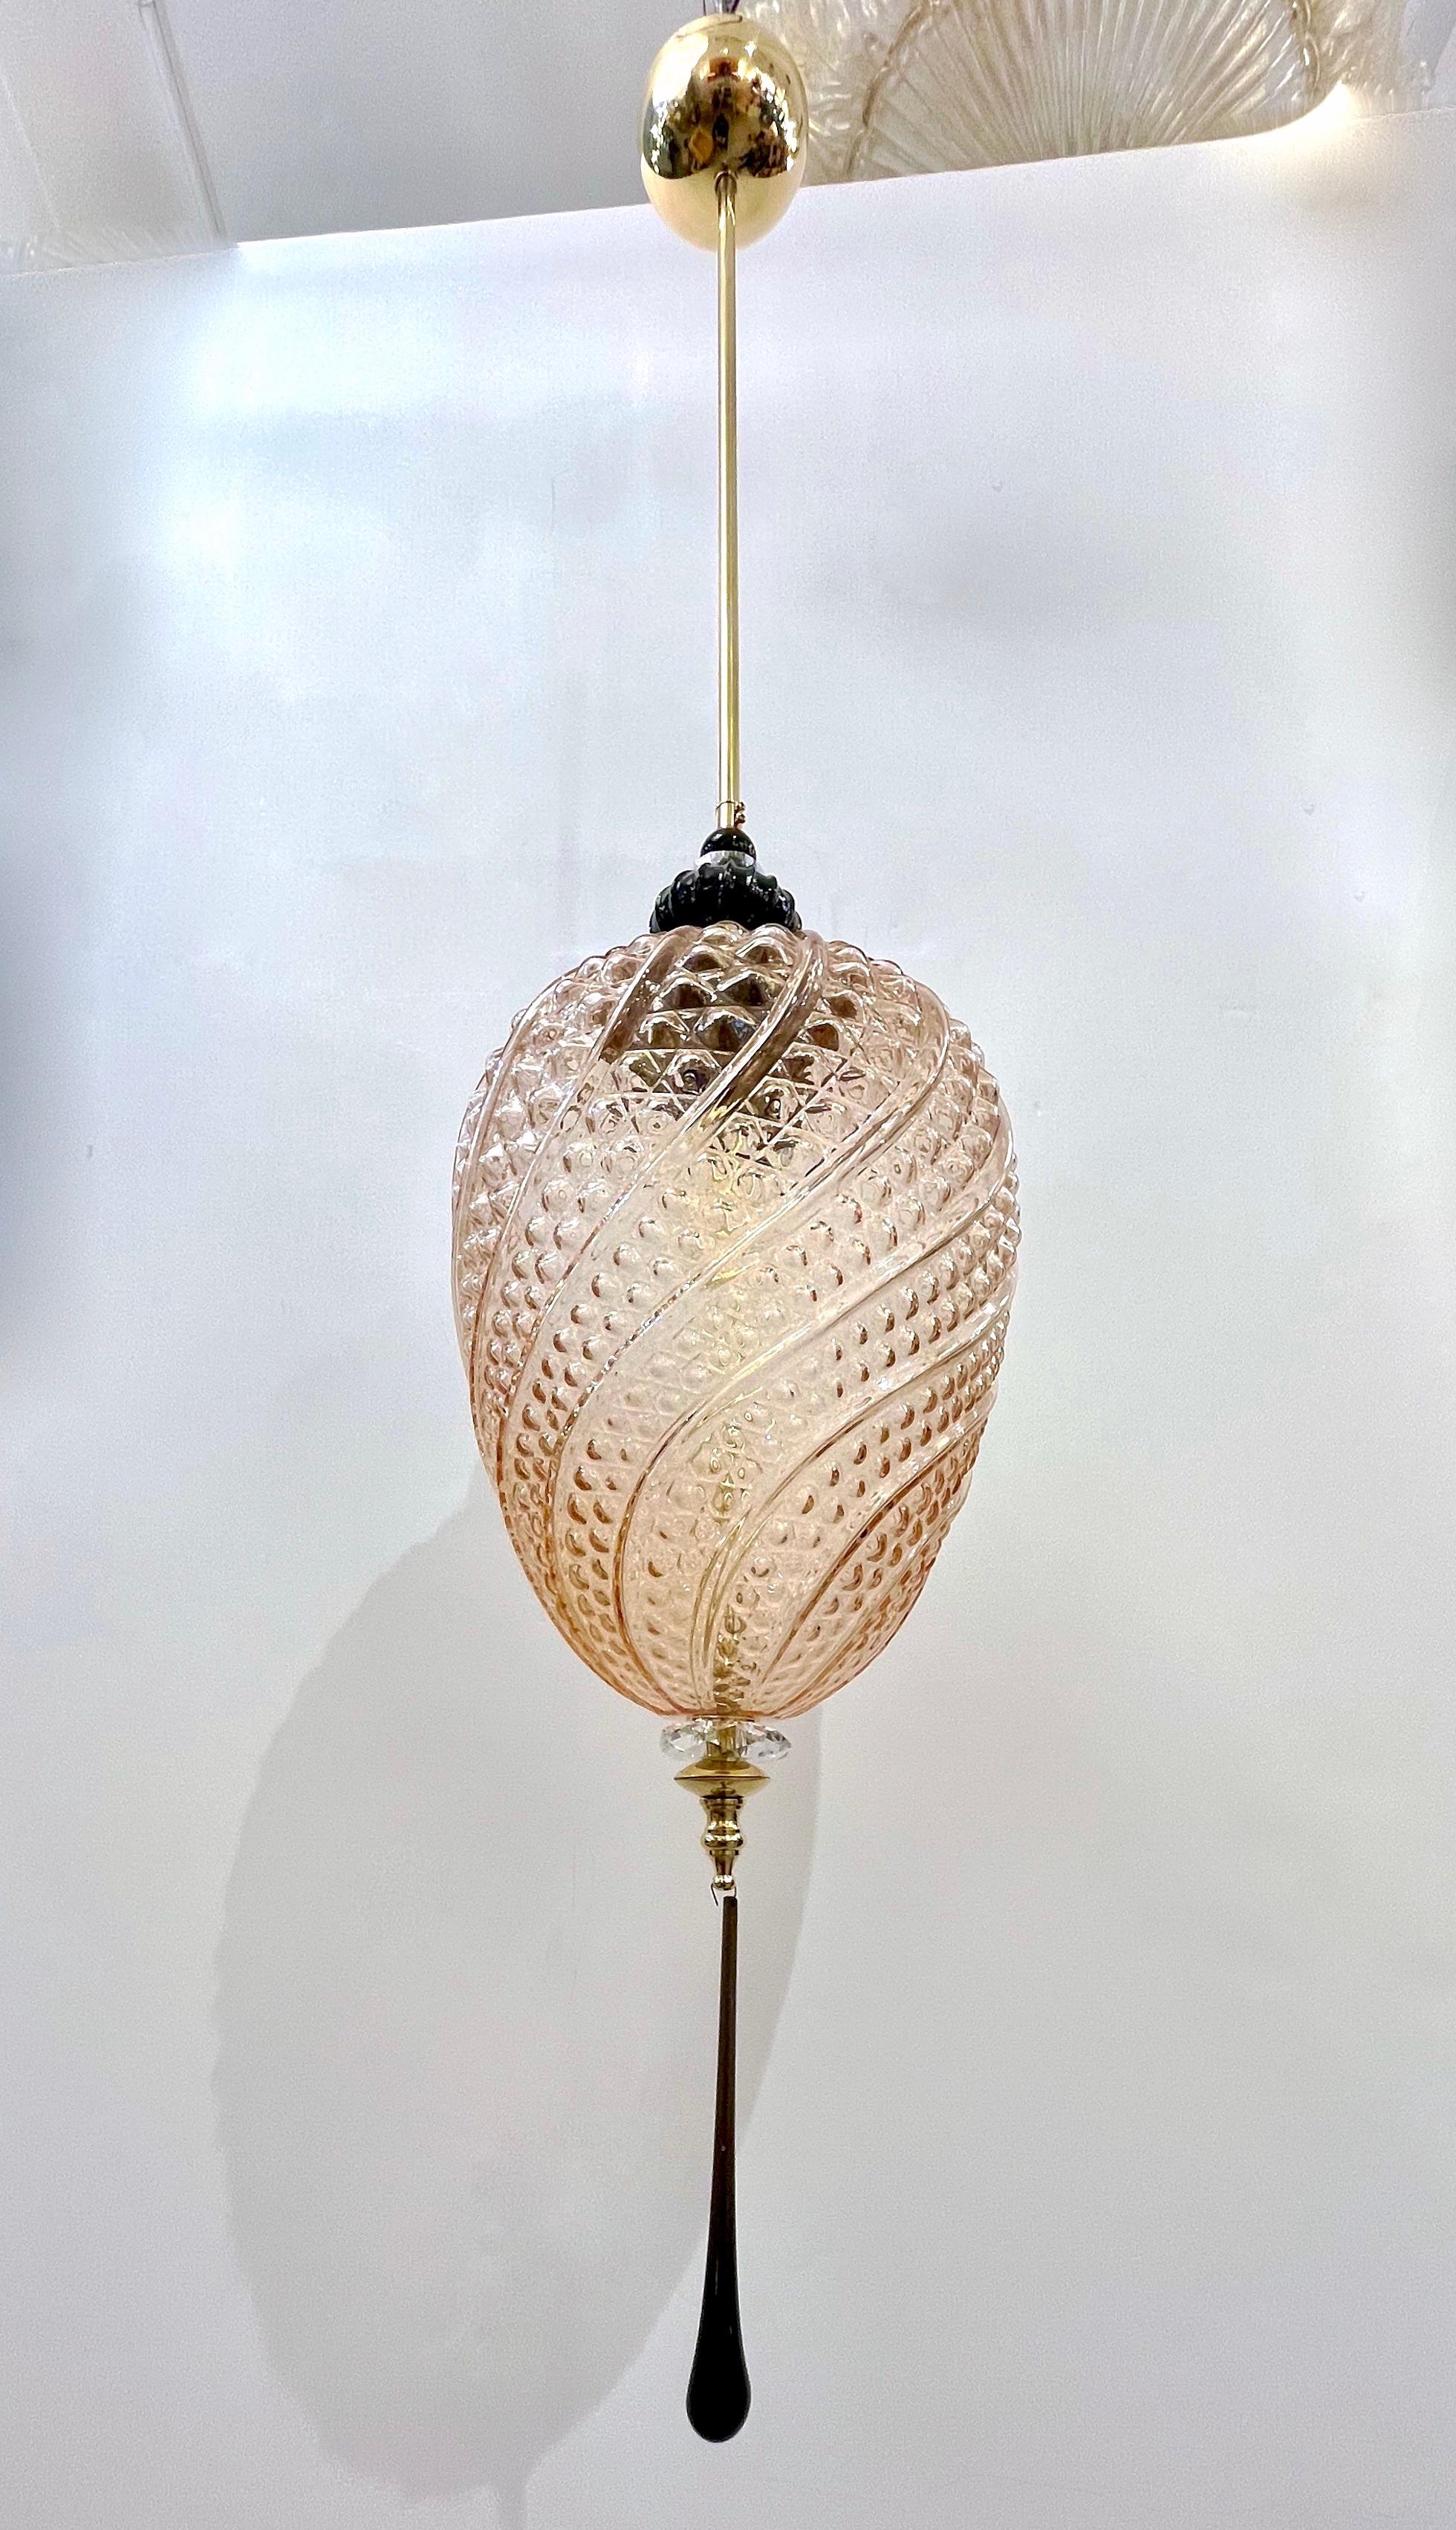 Contemporary orientalist style custom lantern chandelier, of a modern Venetian geometric series with 4 shapes as per images, entirely custom made in Italy, here with brass hardware, the organic egg shape globe in an innovative blown textured Murano